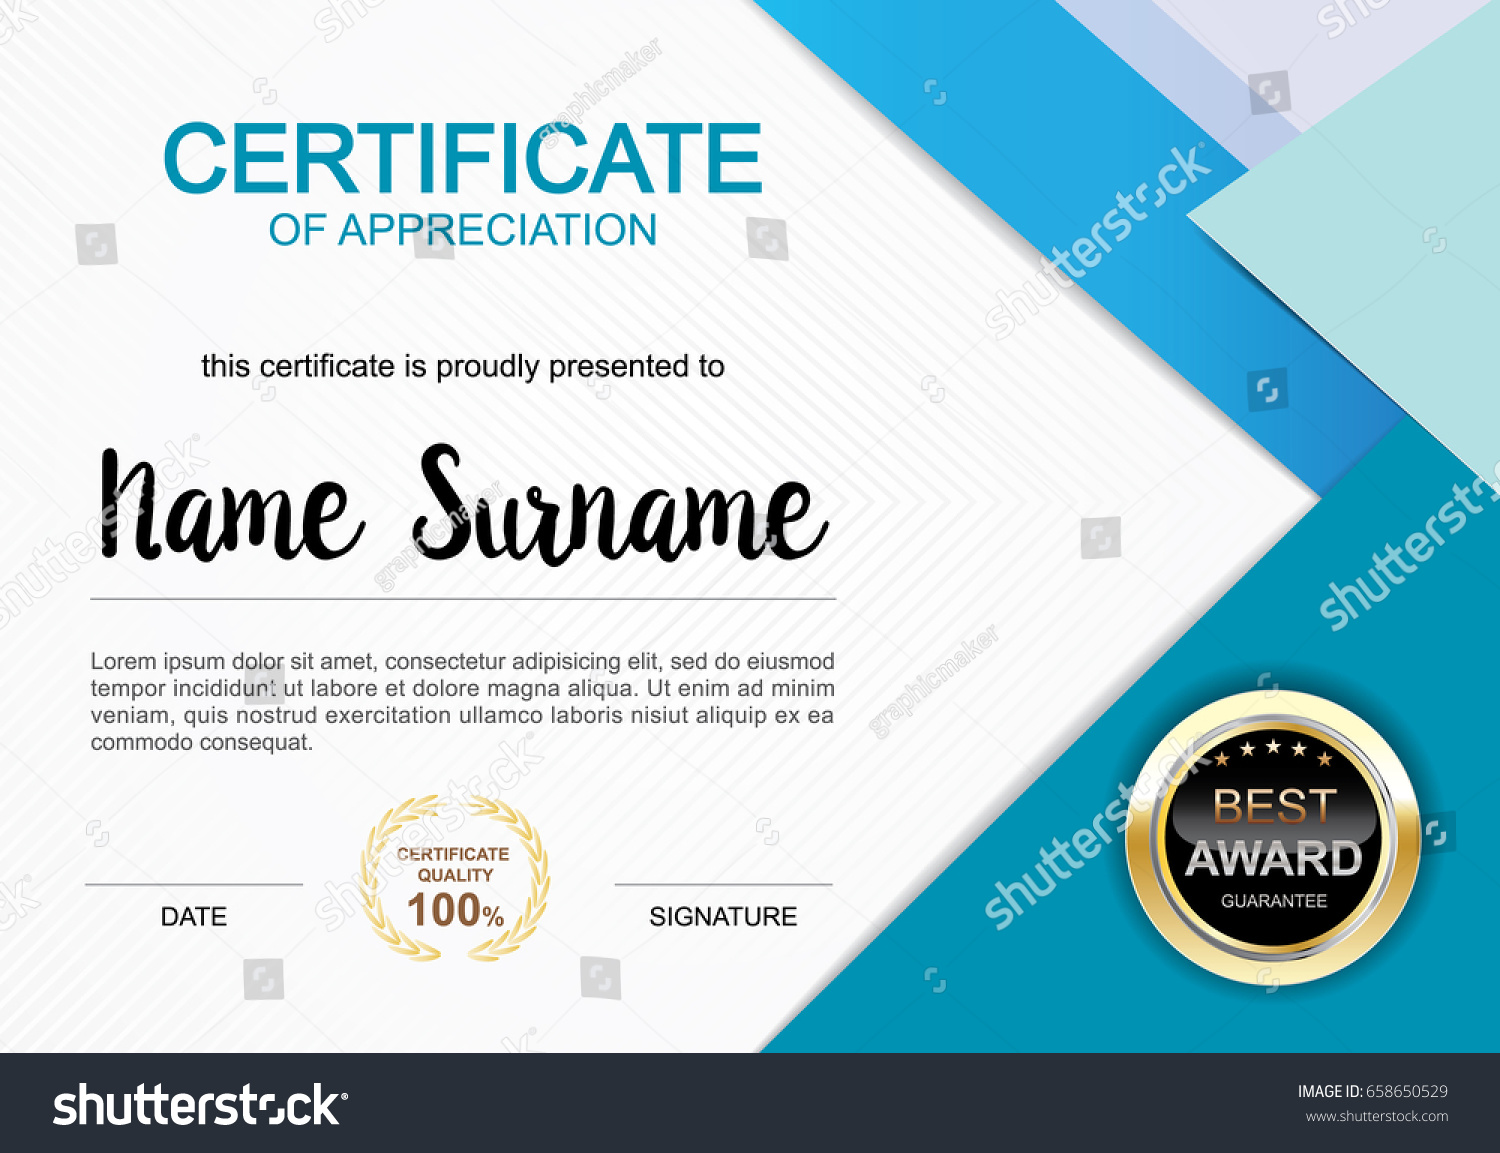 Official Certificate Template from image.shutterstock.com